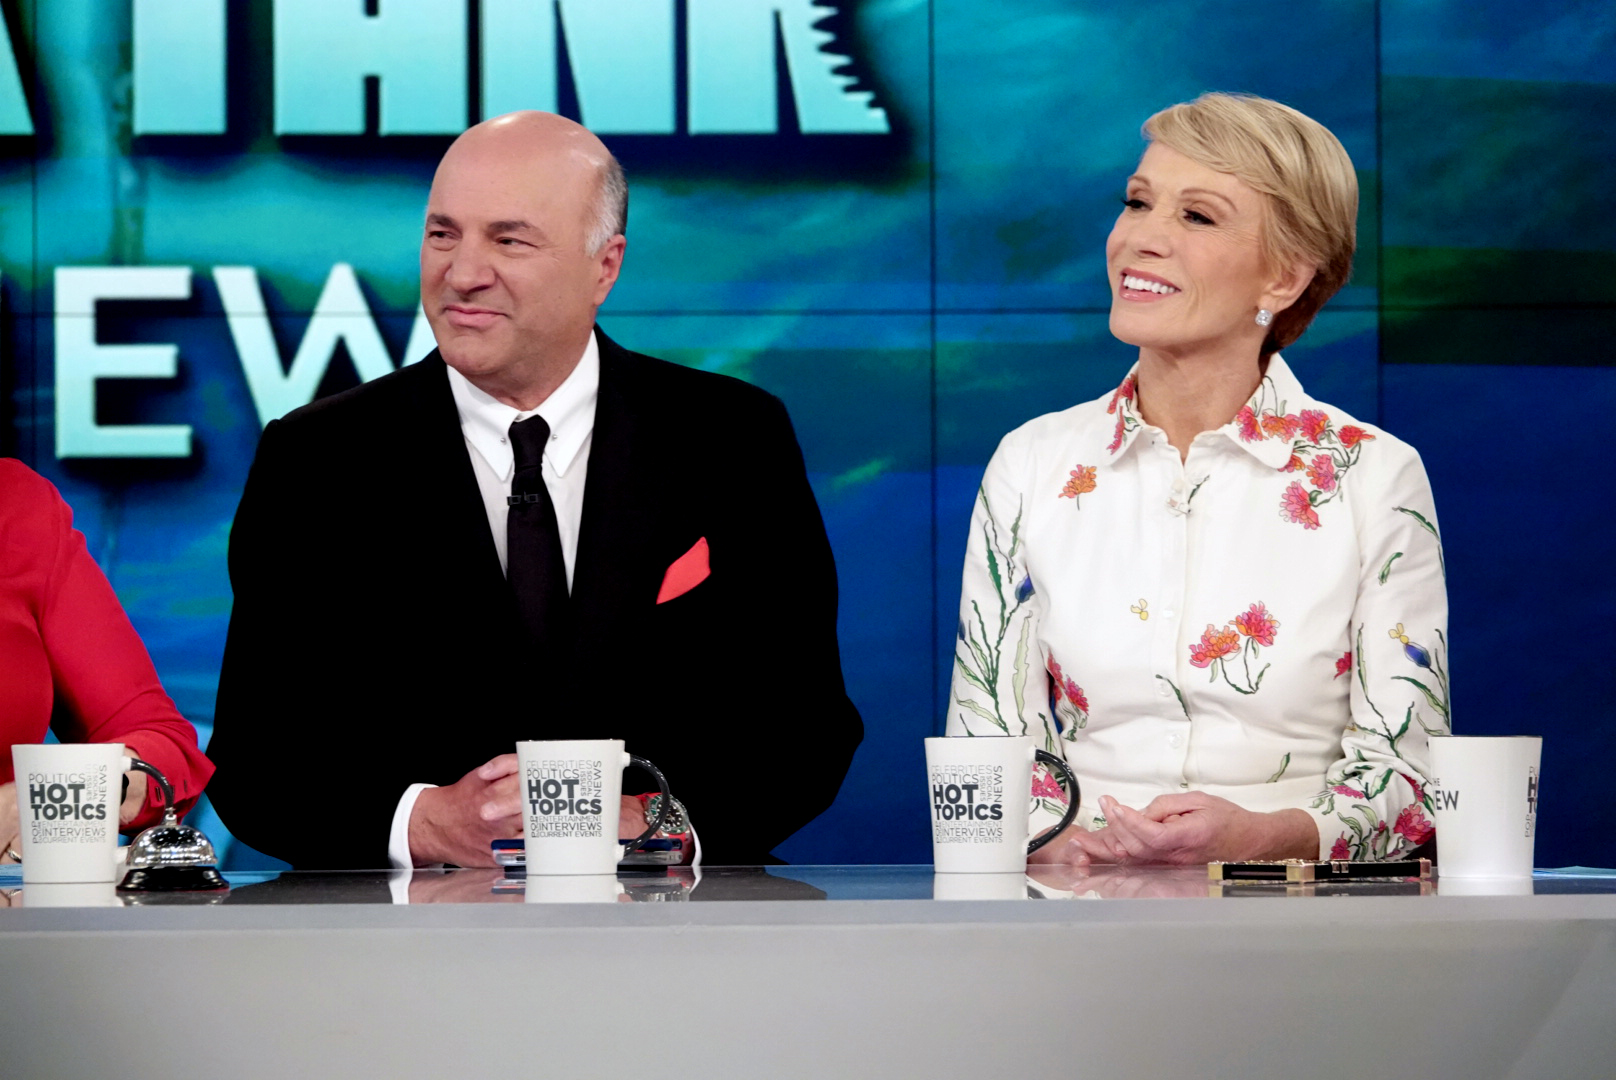 PHOTO: Shark Tank" investors Kevin O'Leary and Barbara Corcoran discuss Elizabeth Holmes on "The View, "April 11, 2019.